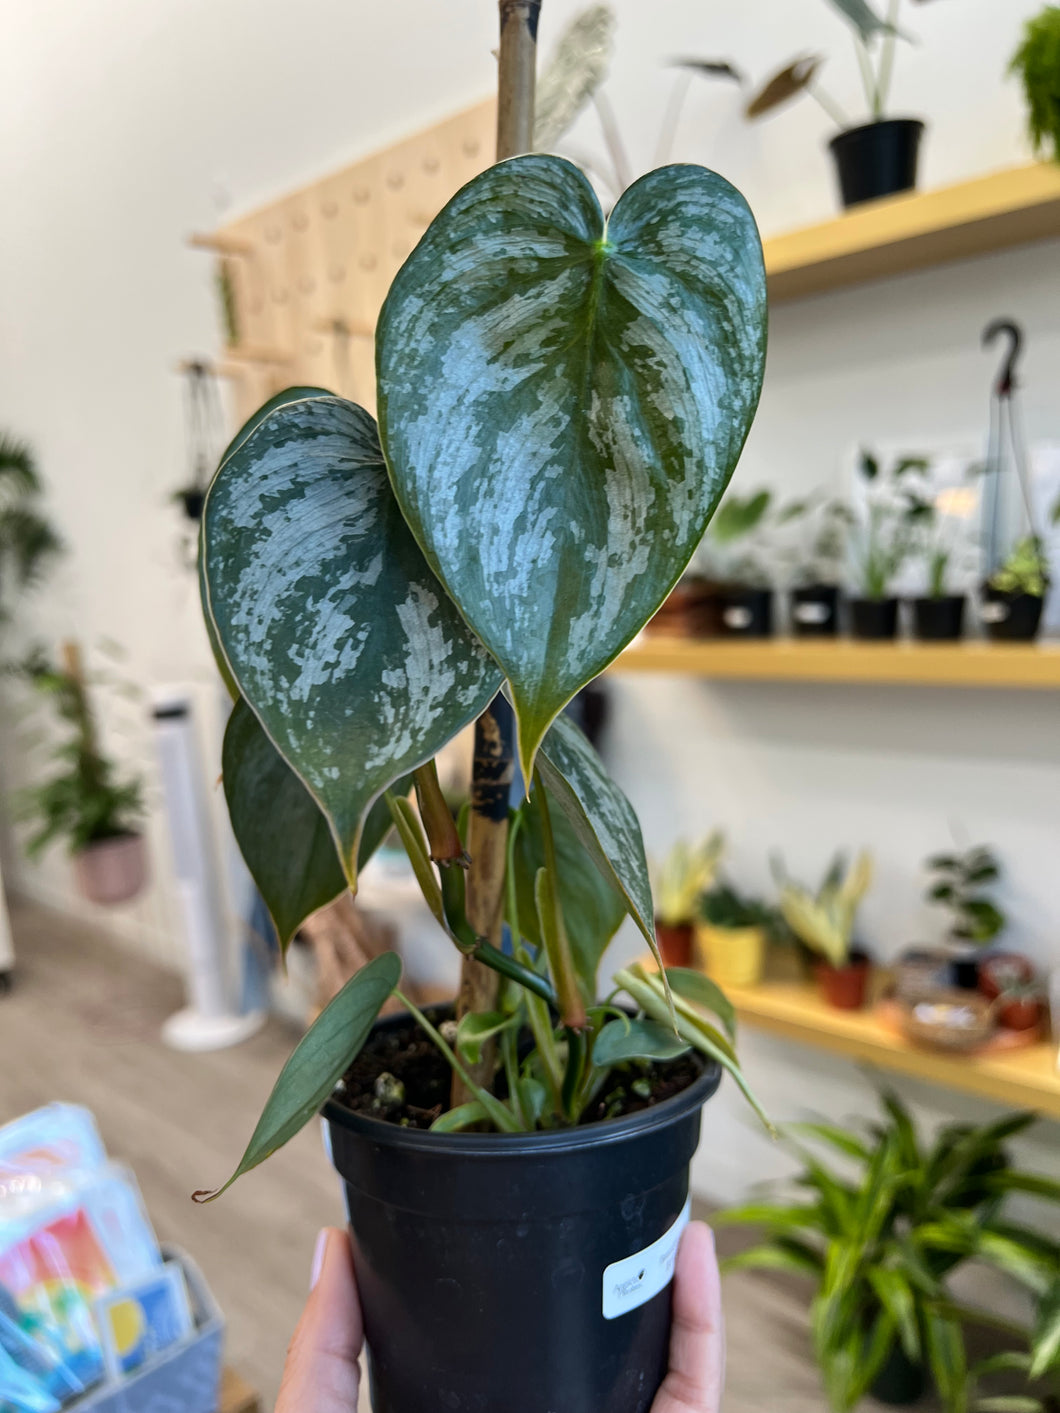 4” Silver leaf philodendrons (Philodendron brandtianum)